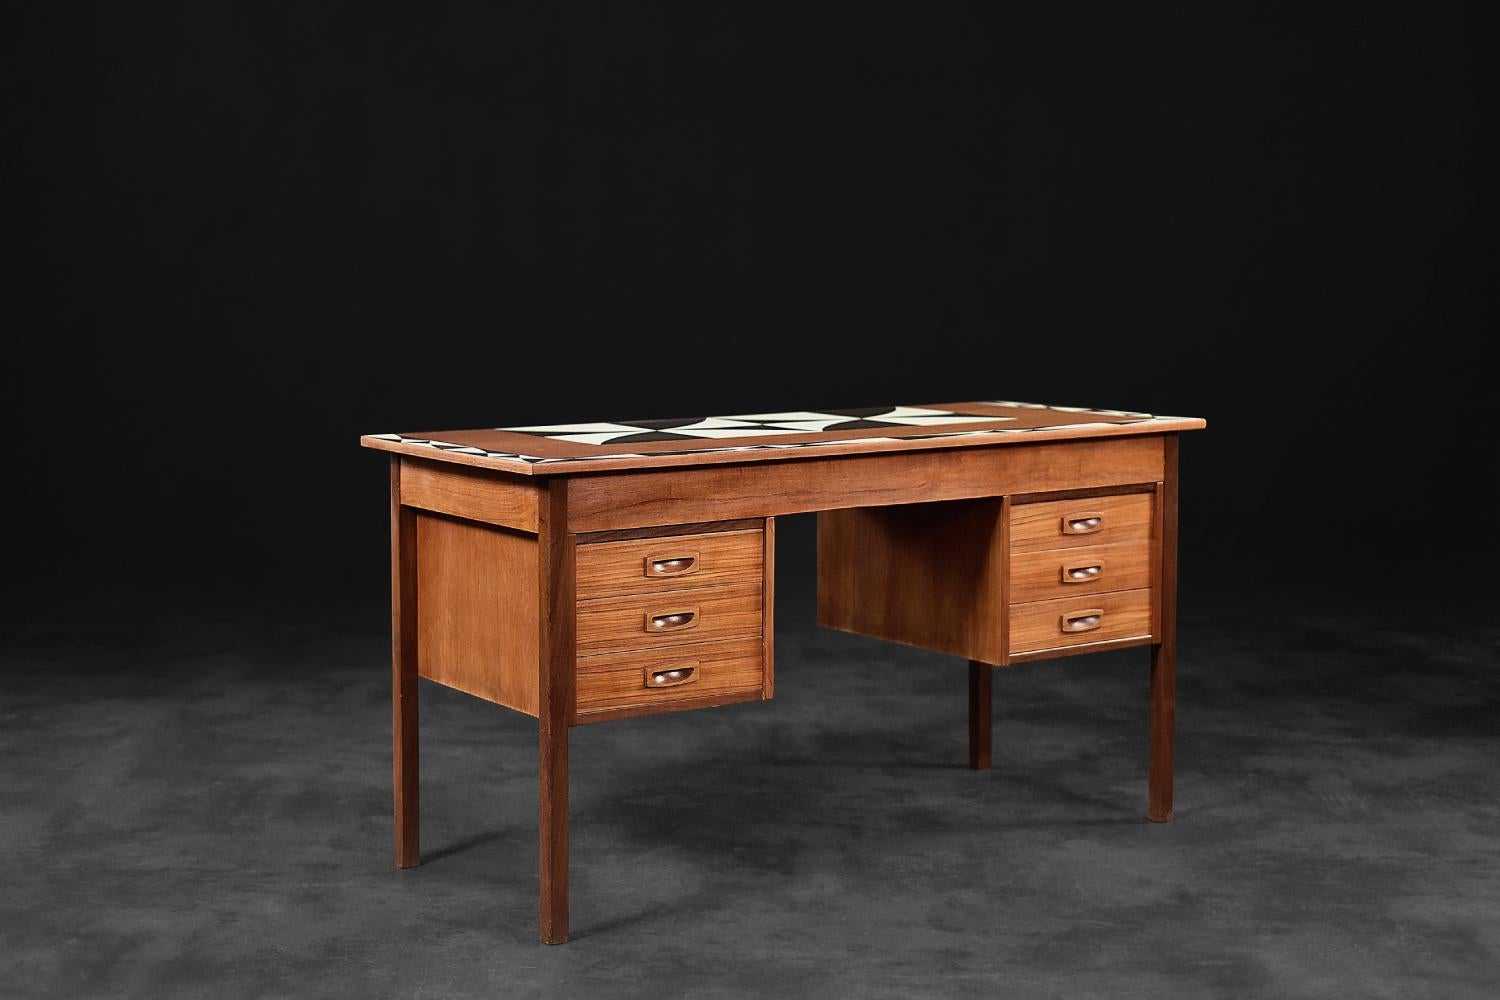 This classic desk was produced in Denmark during the 1960s. It is made of teak in a warm shade of brown. Teak wood is very durable. The high oil content means that virtually no water seeps into it. The desk has six drawers, three on each side. The